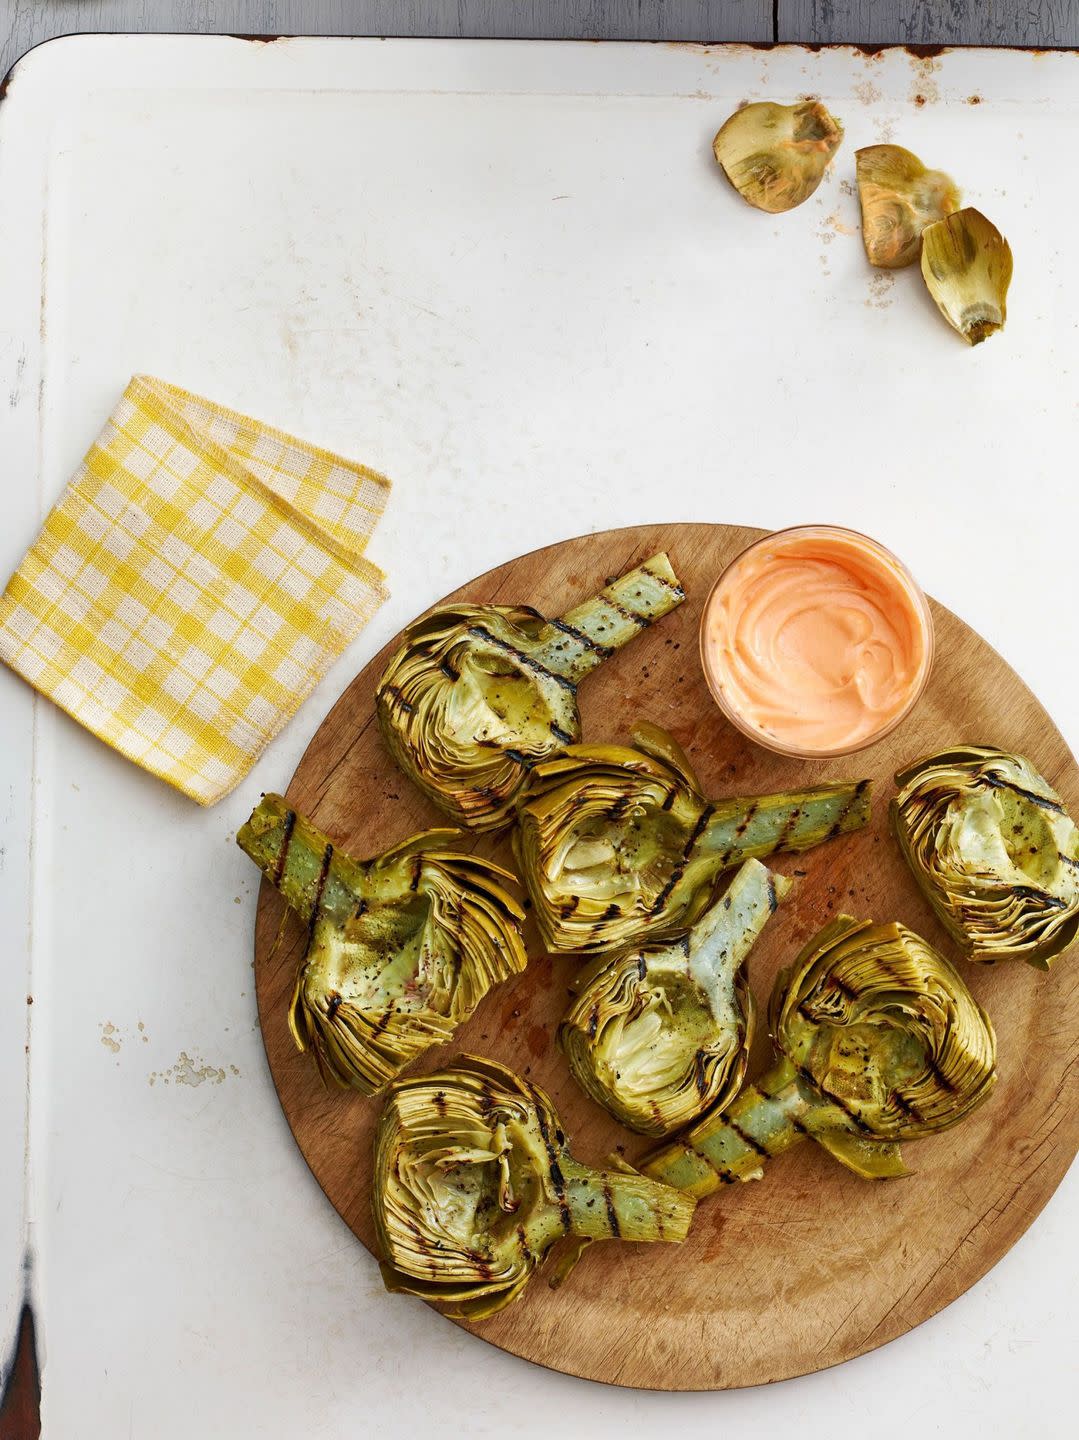 grilled artichokes with harissa honey dip on a wooden serving board